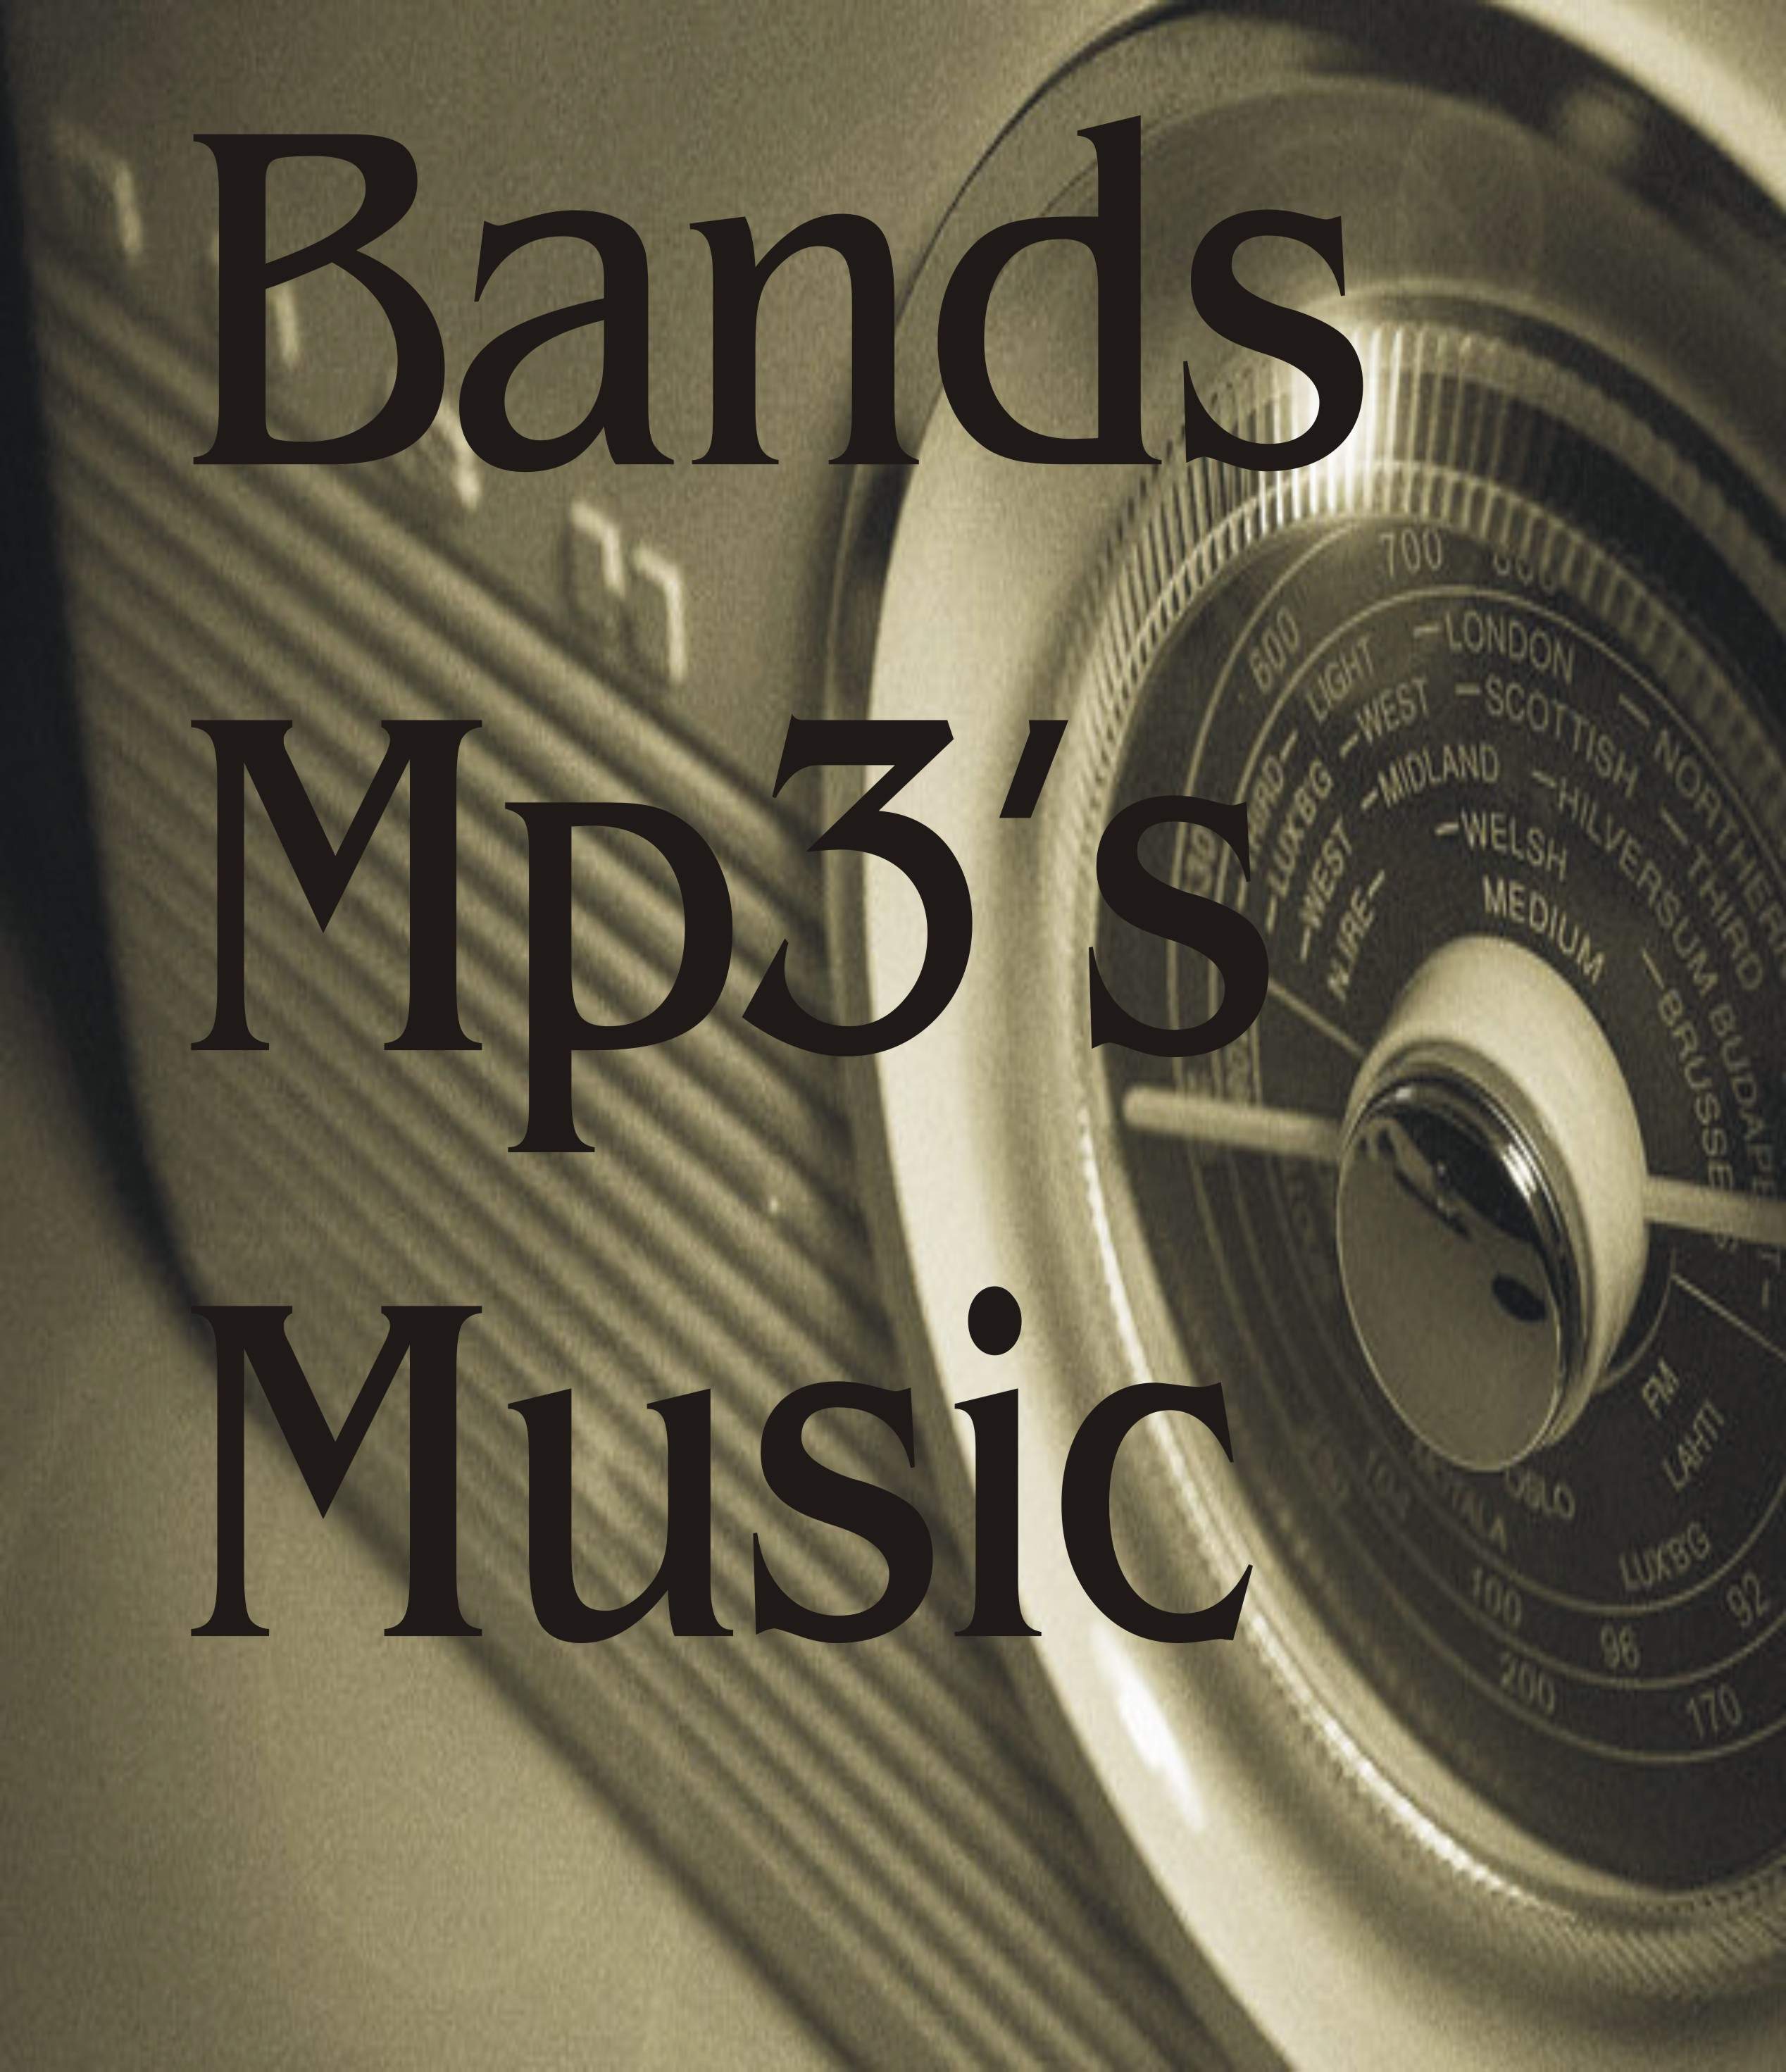 Bands and Mp3s